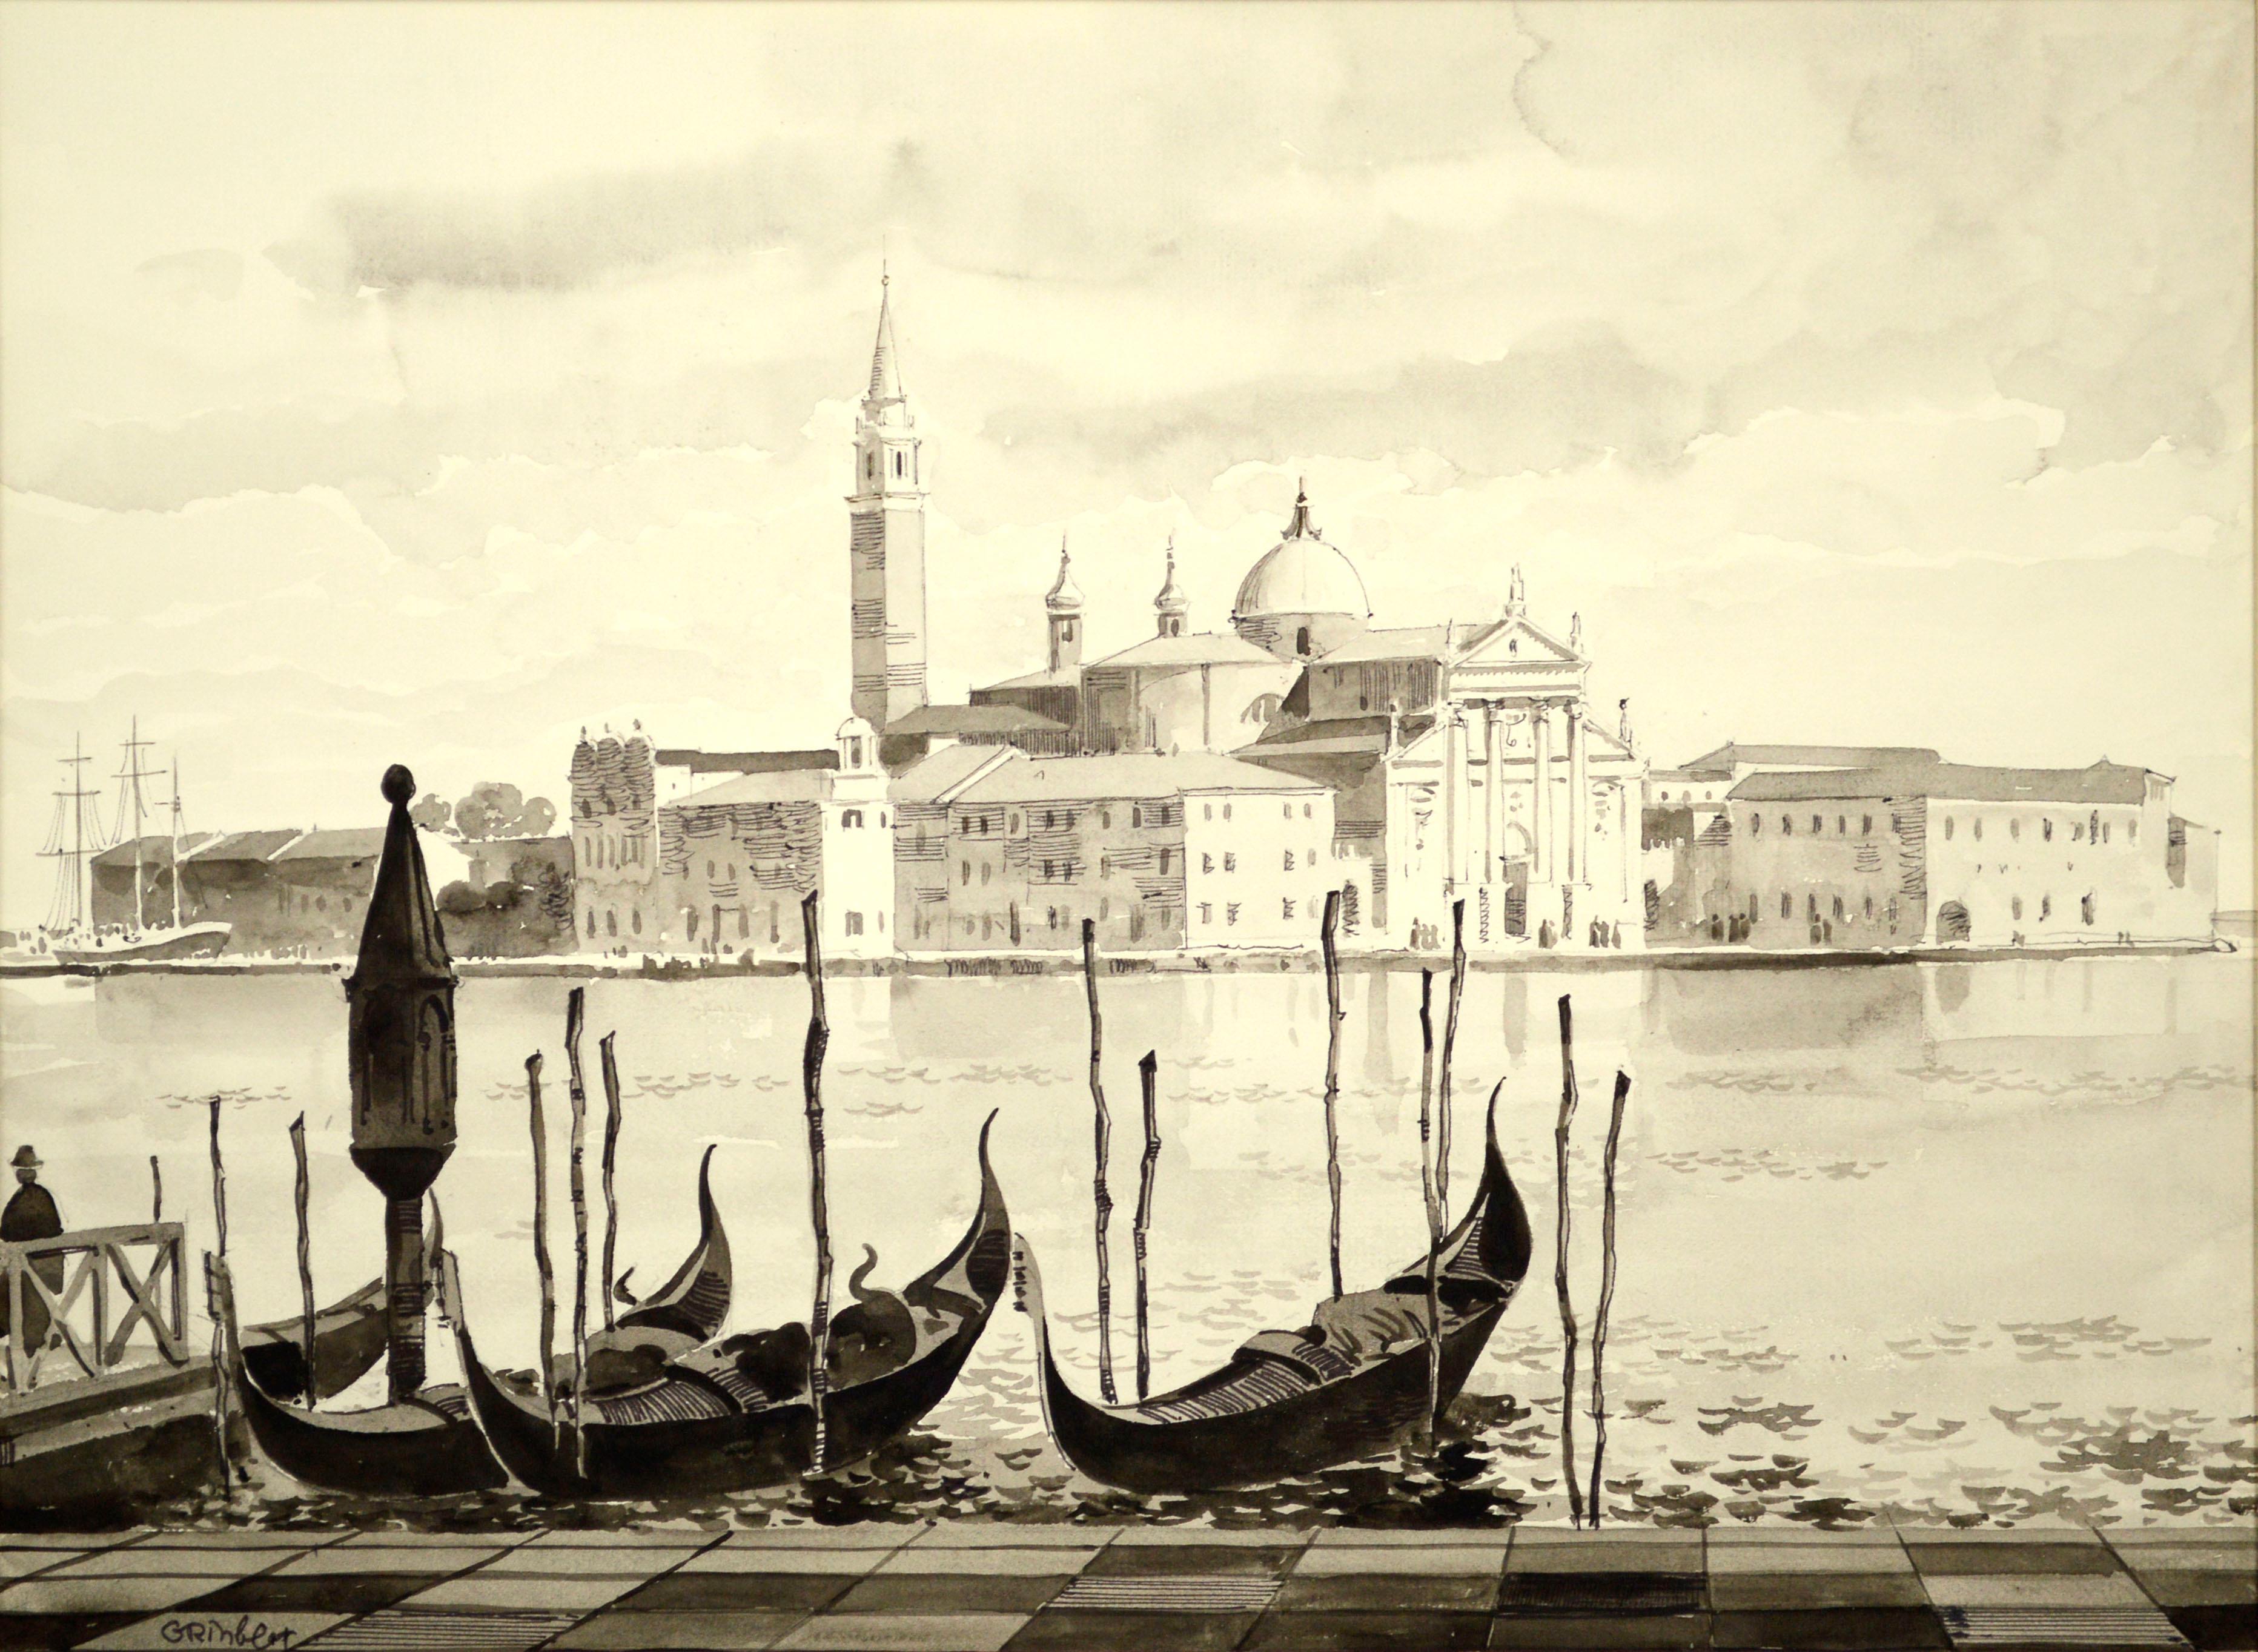 View of St. Marks Basilica, Venice Italy Landscape Watercolor with Gondolas - Art by Unknown